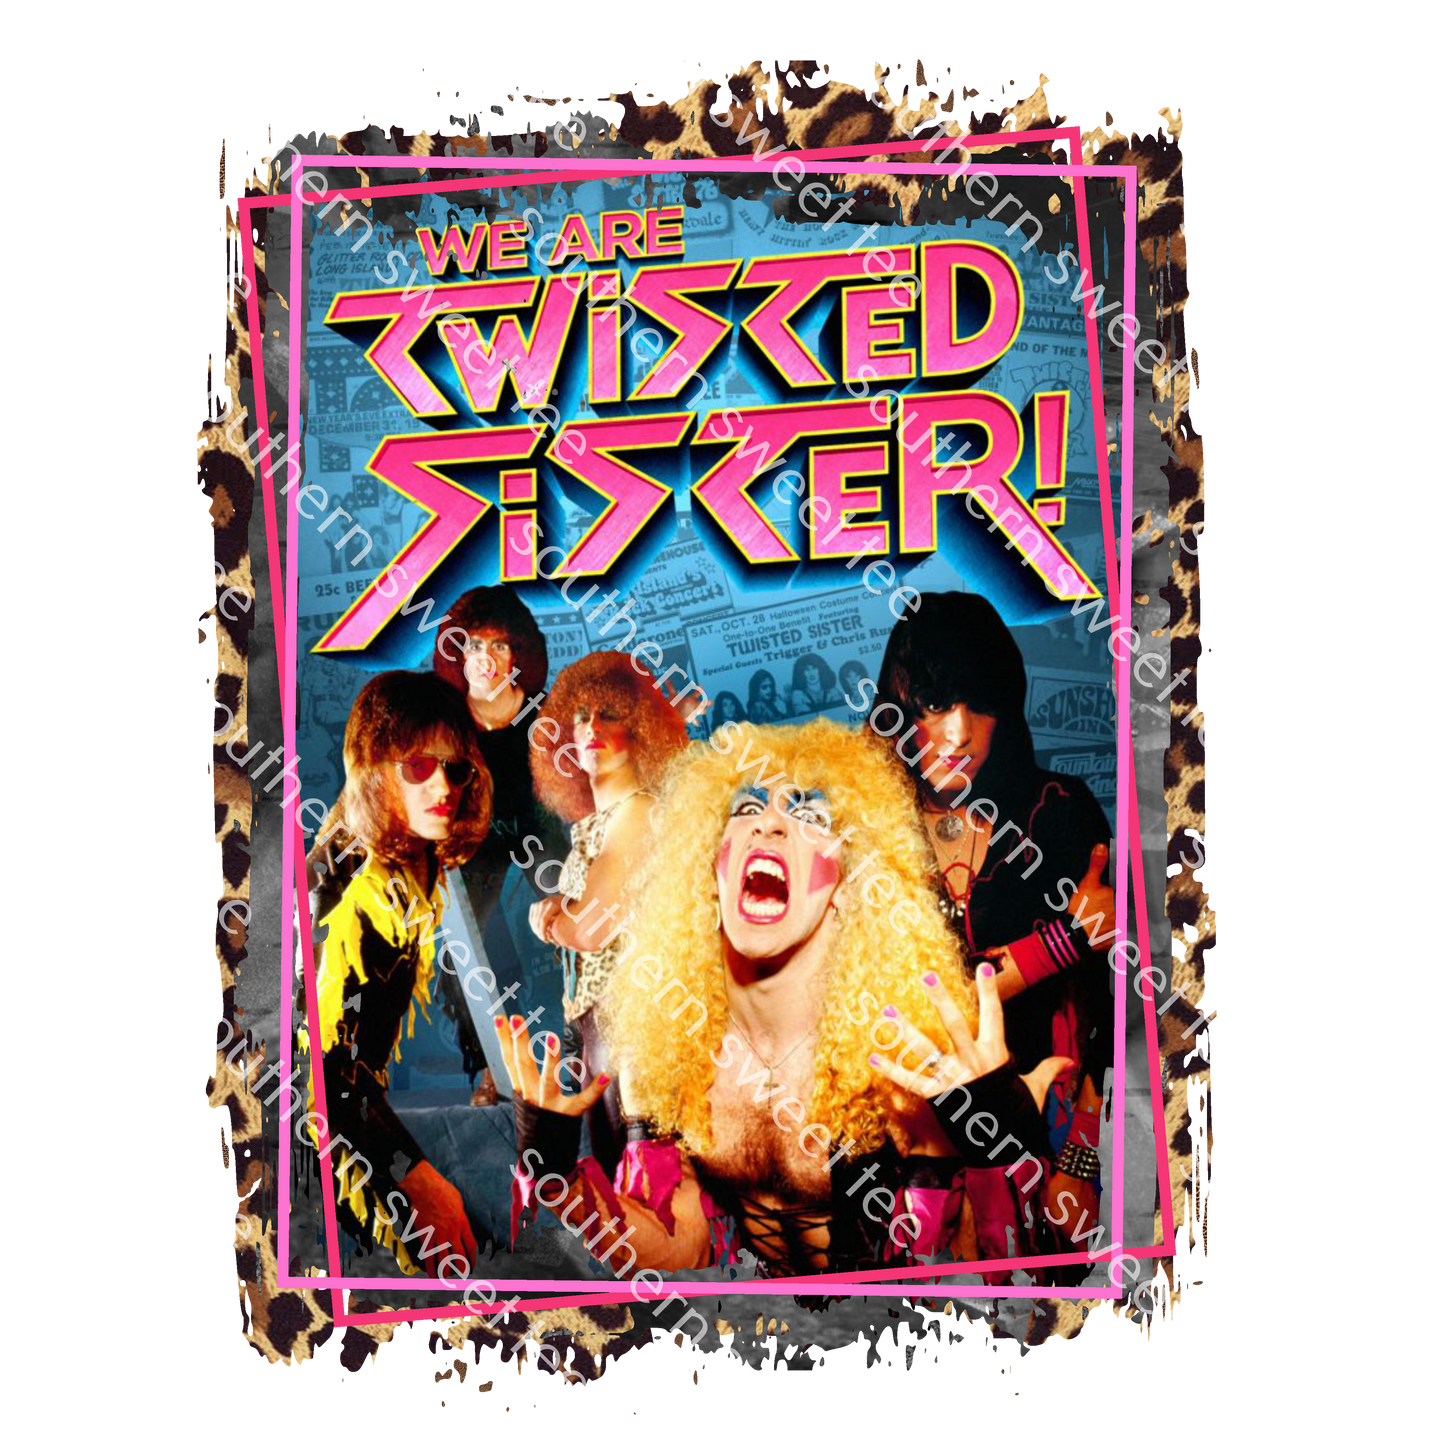 Twisted sister poster.ss20